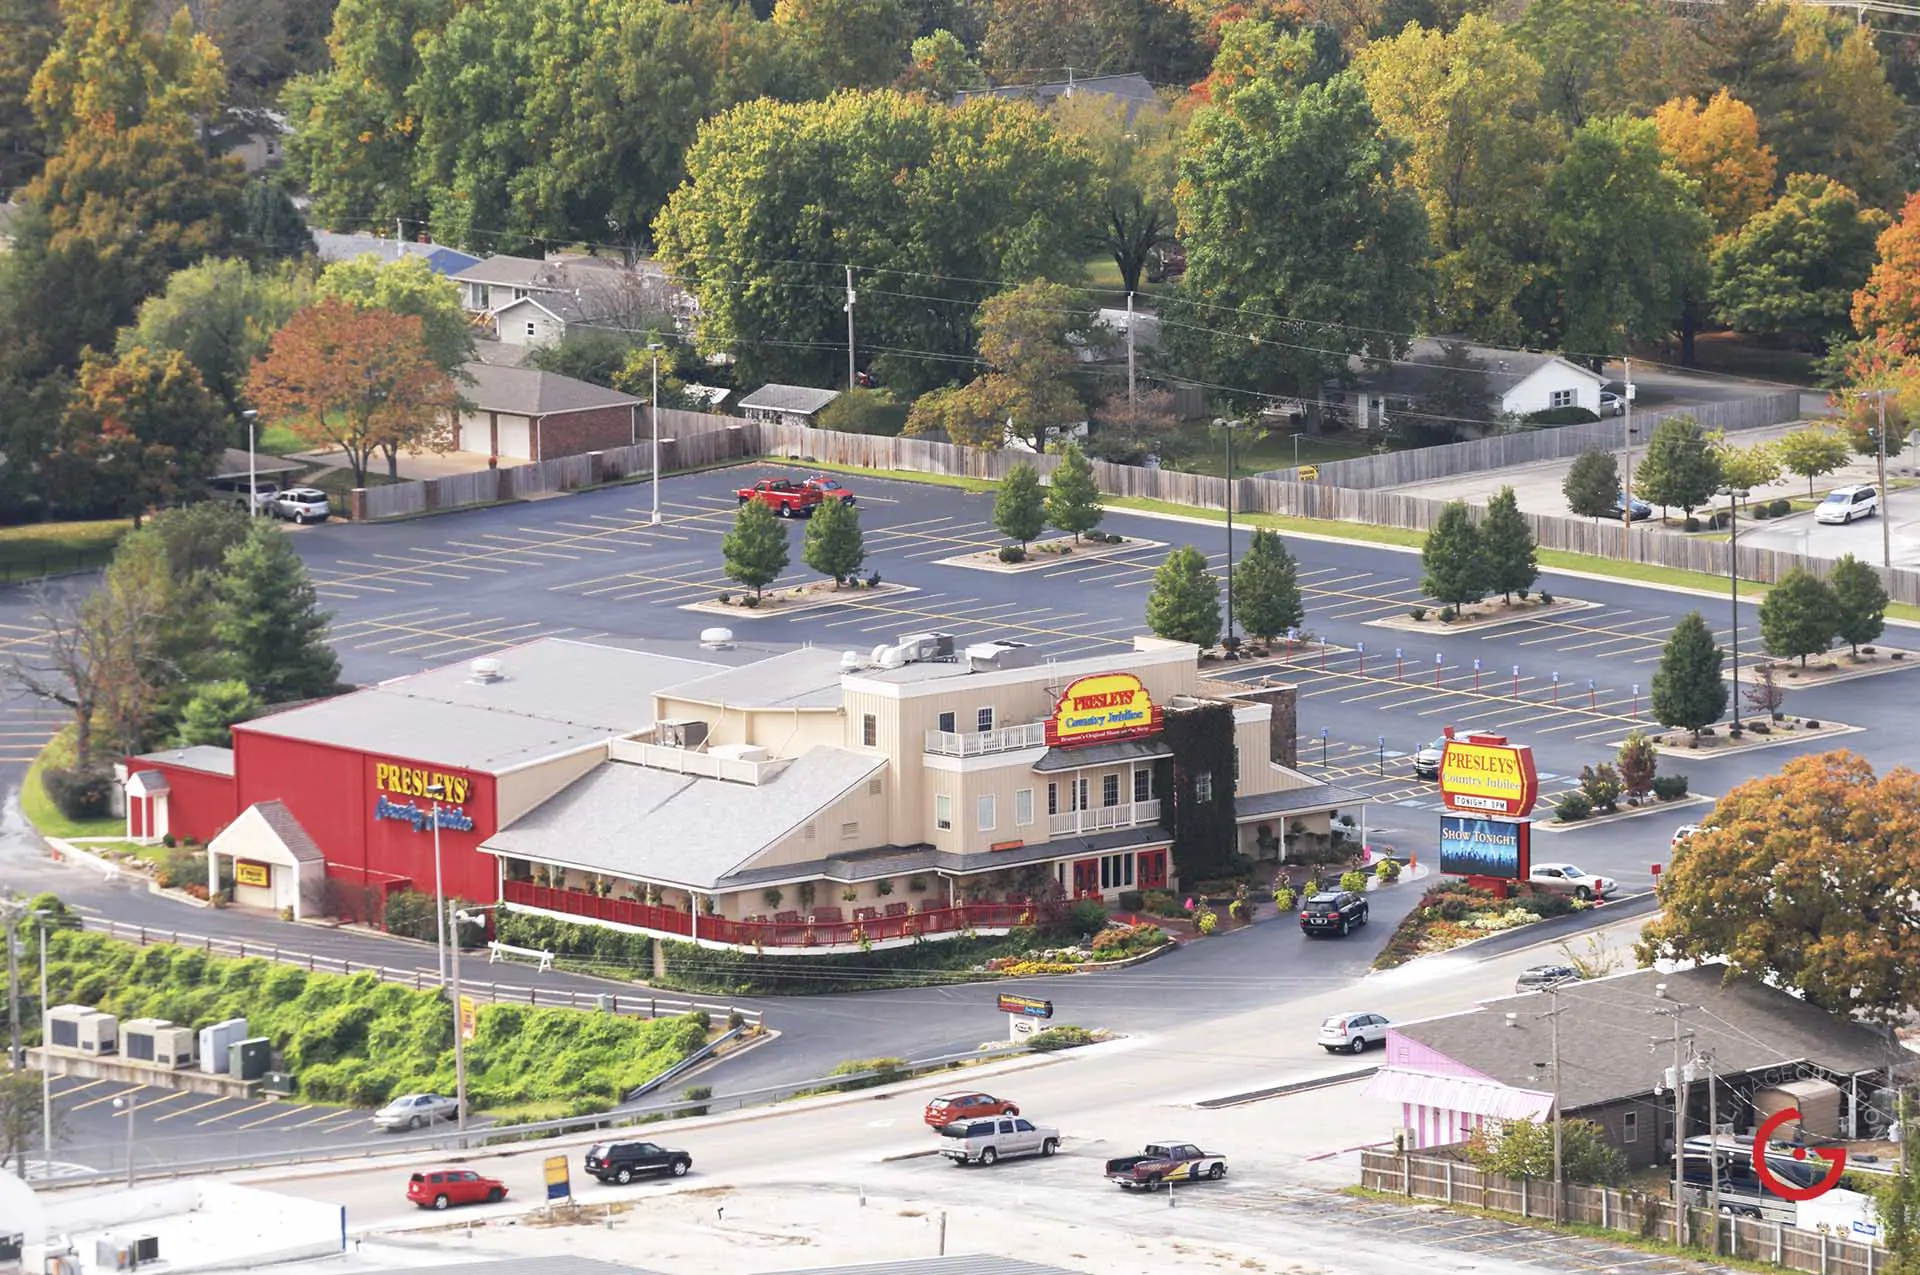 Aerial photo of Presleys Theater on hwy 76 in Branson - Advertising photographers in Branson Missouri, Branson Missouri photography